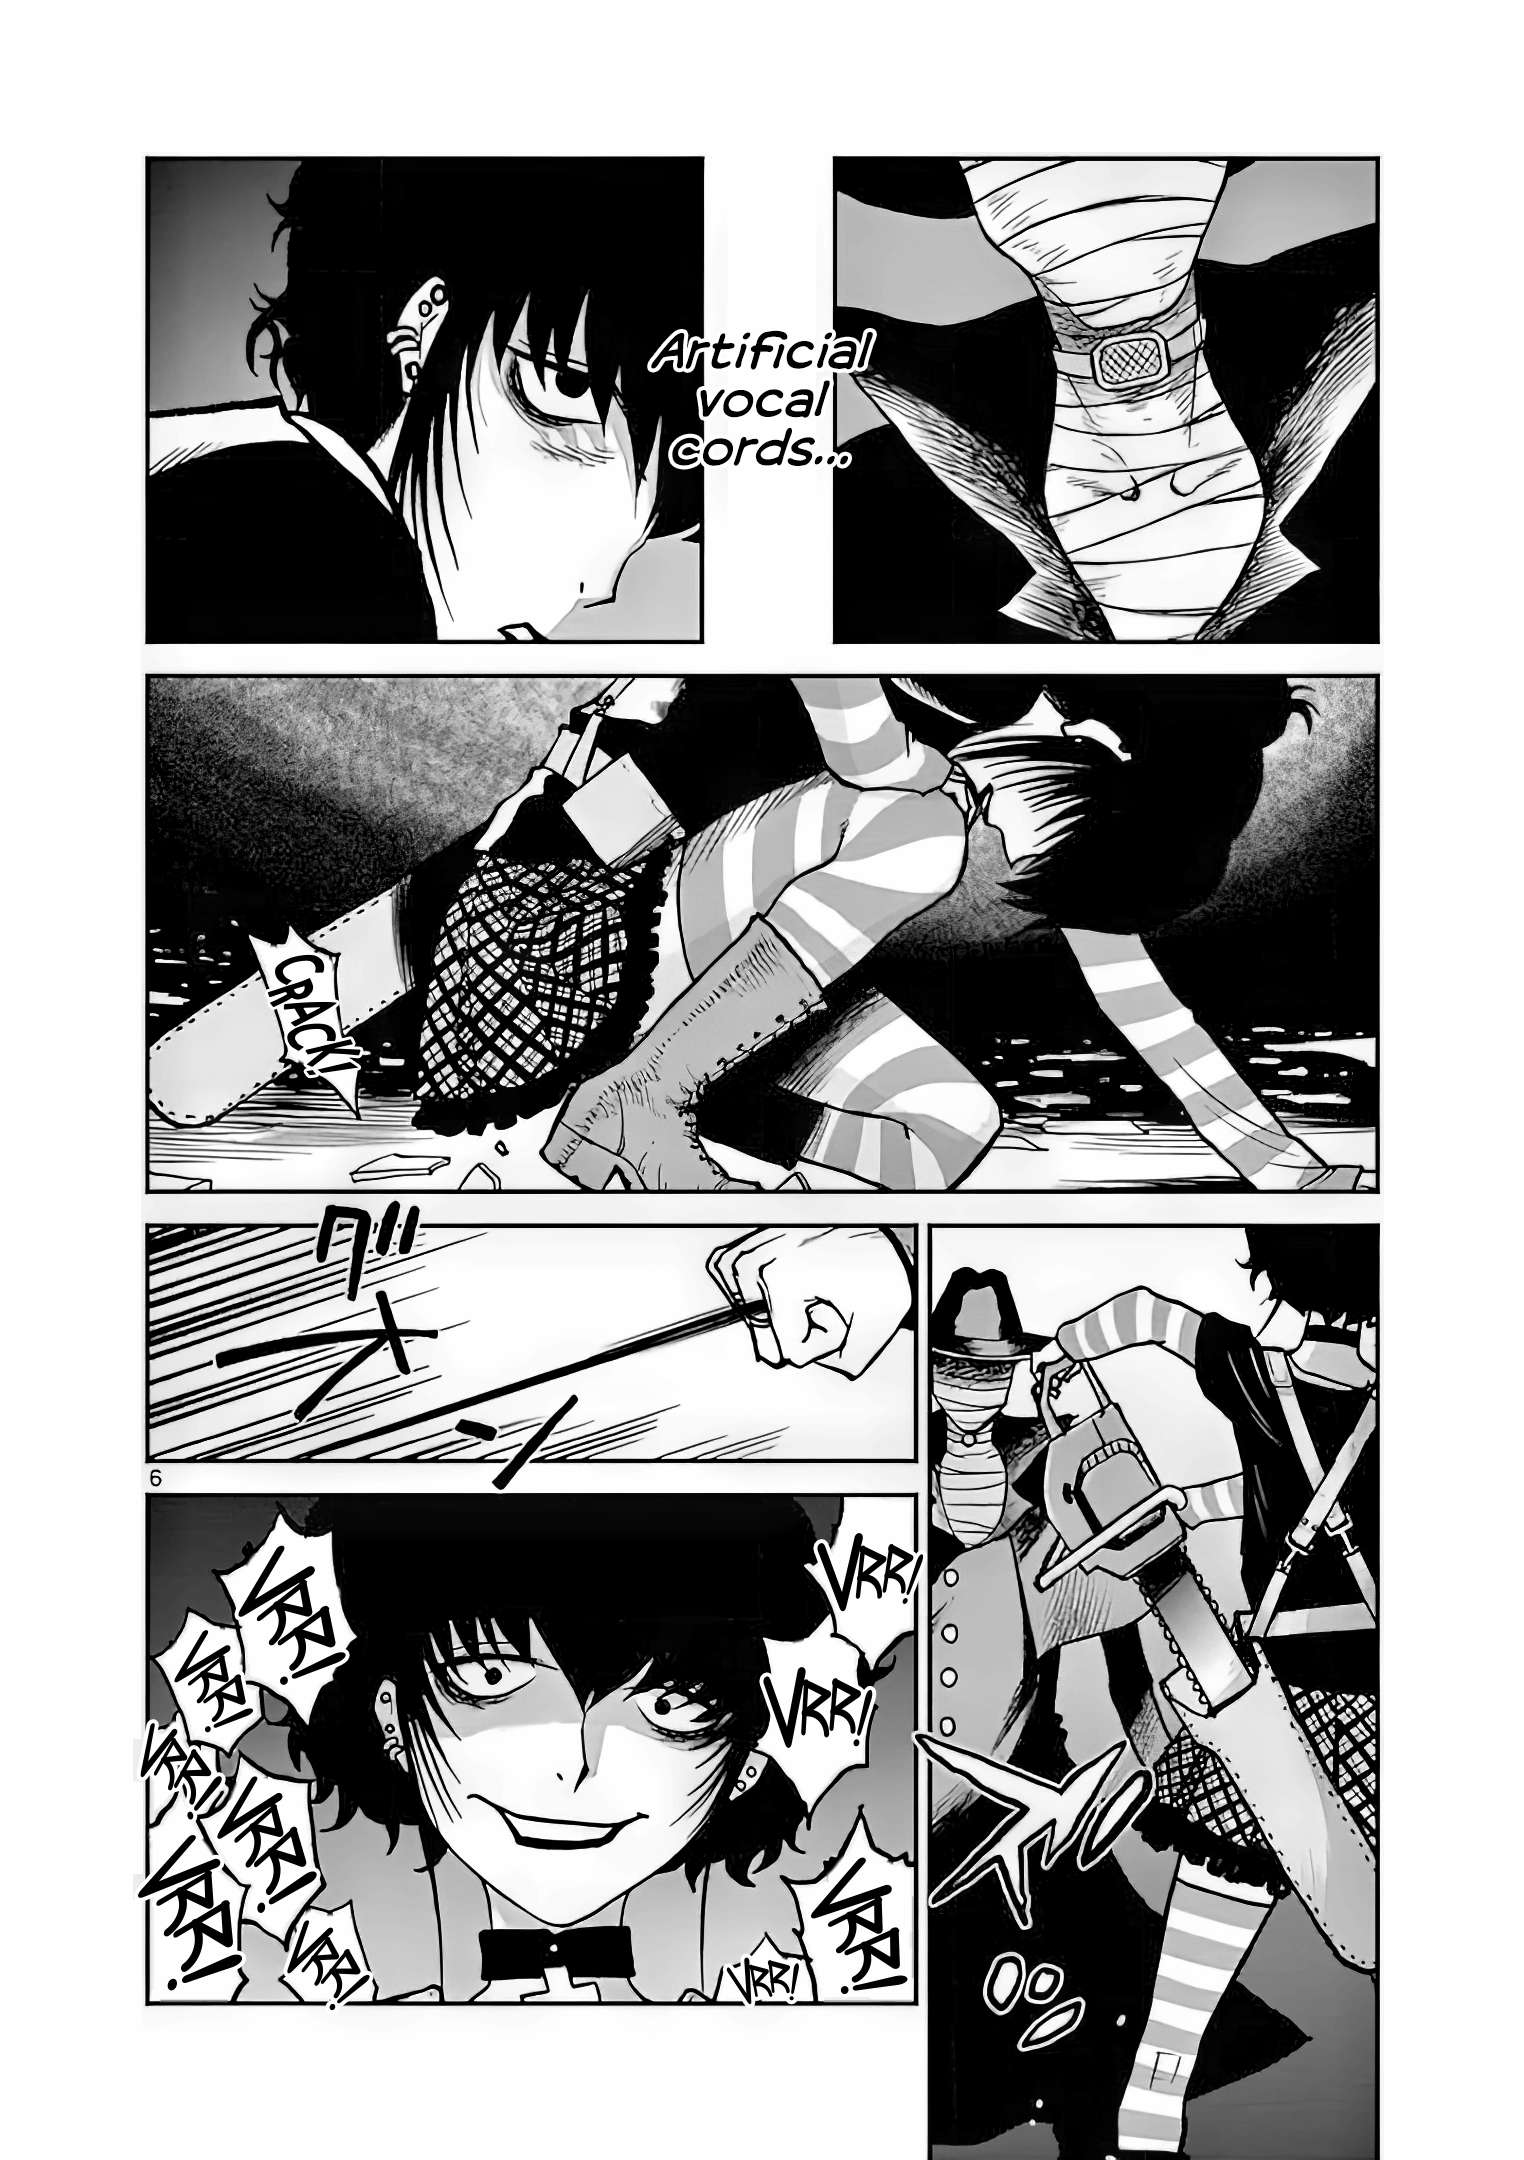 Black Lagoon: Sawyer the Cleaner - Dismemberment! Gore Gore Girl - chapter 6 - #6